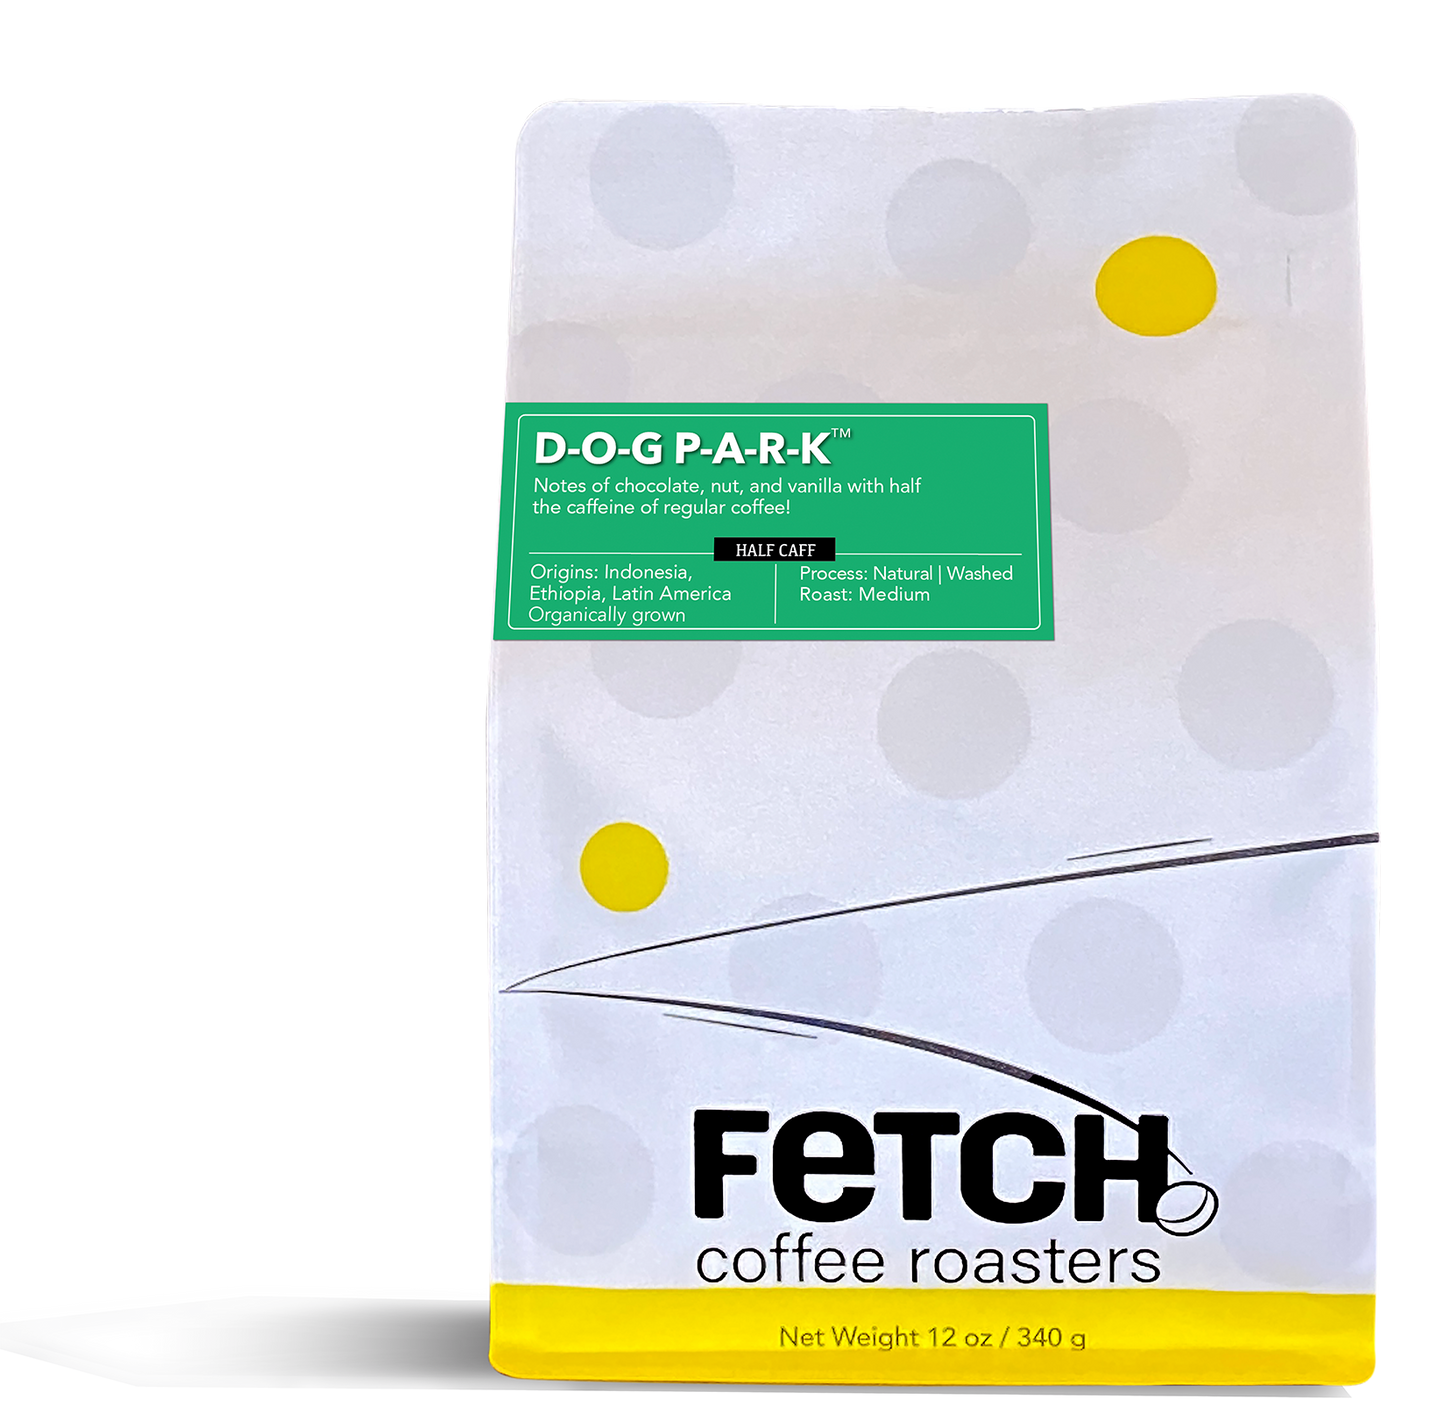 D-O-G P-A-R-K Half-caff has a green label offset to the left and toward the top of the white reclosable coffee bag. The bottom of the bag has a yellow band, and the logo shows a bean sitting at the base of the 'h' in Fetch.